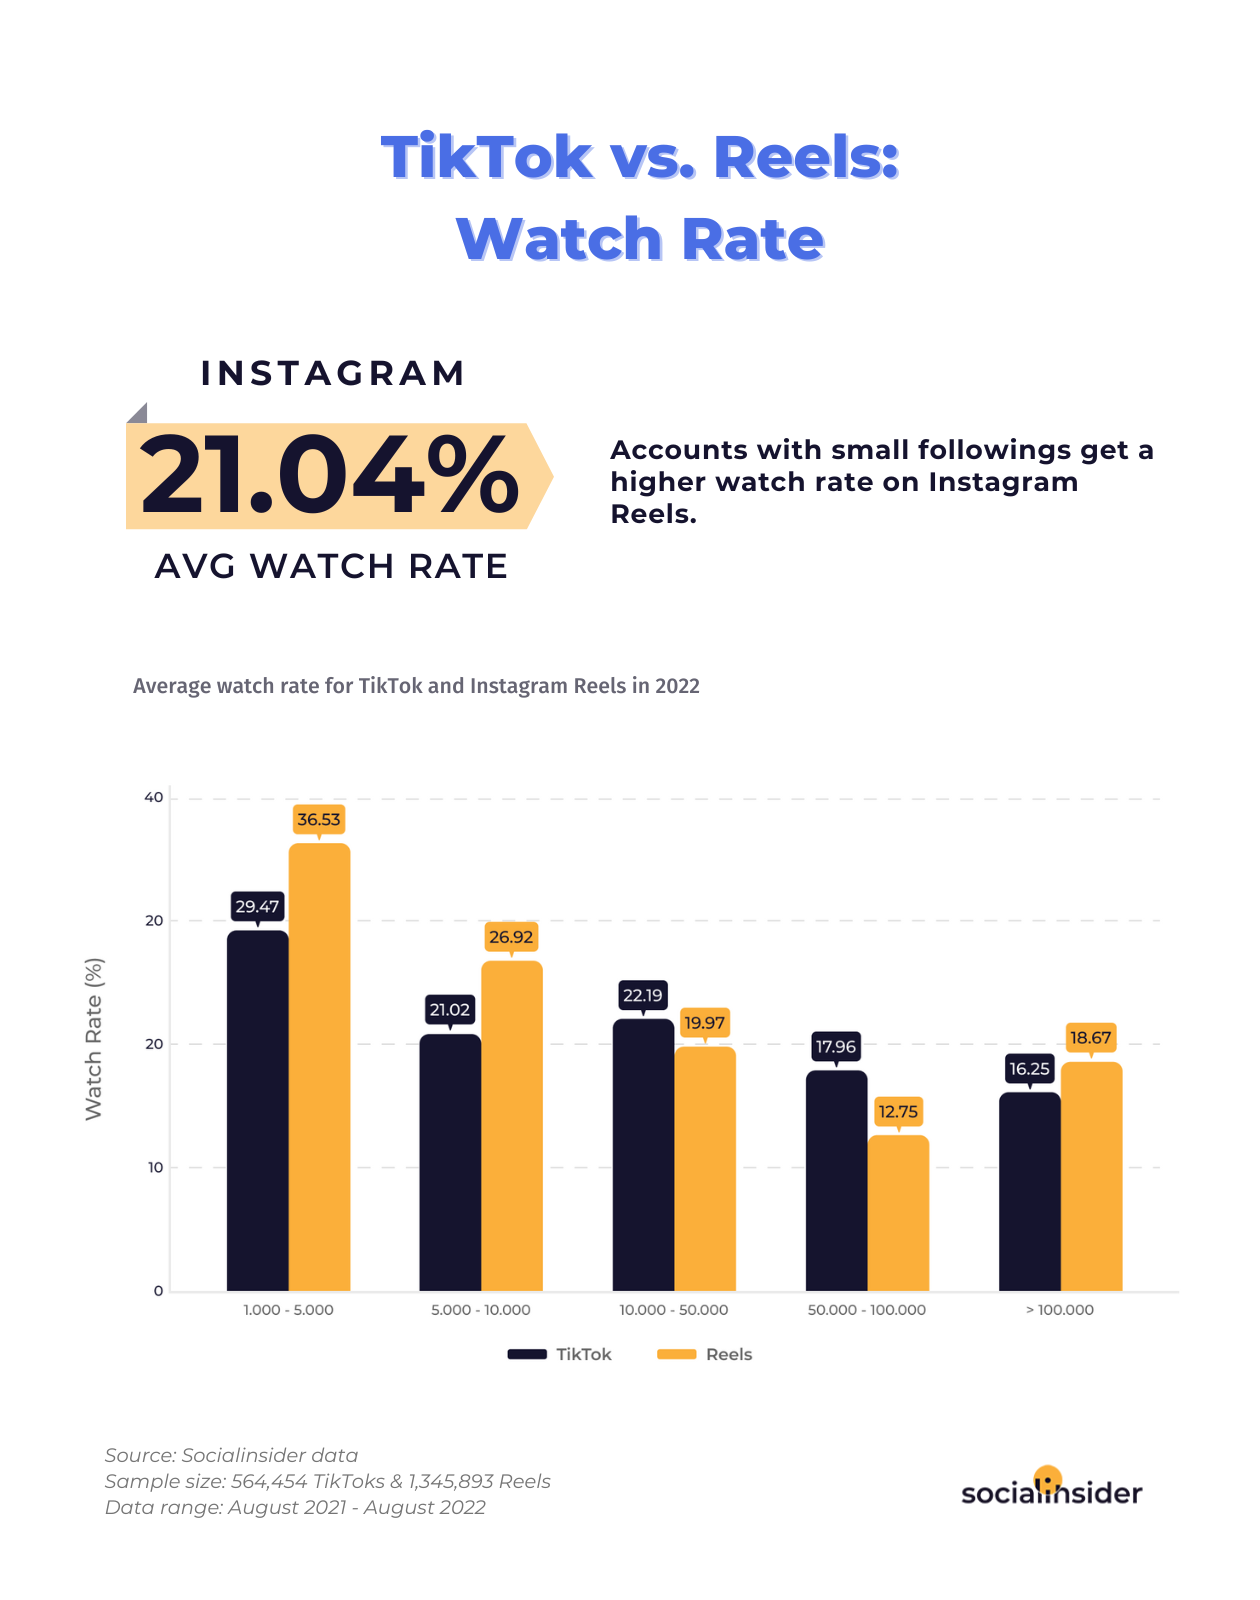 Reels vs TikTok from a watch rate perspective